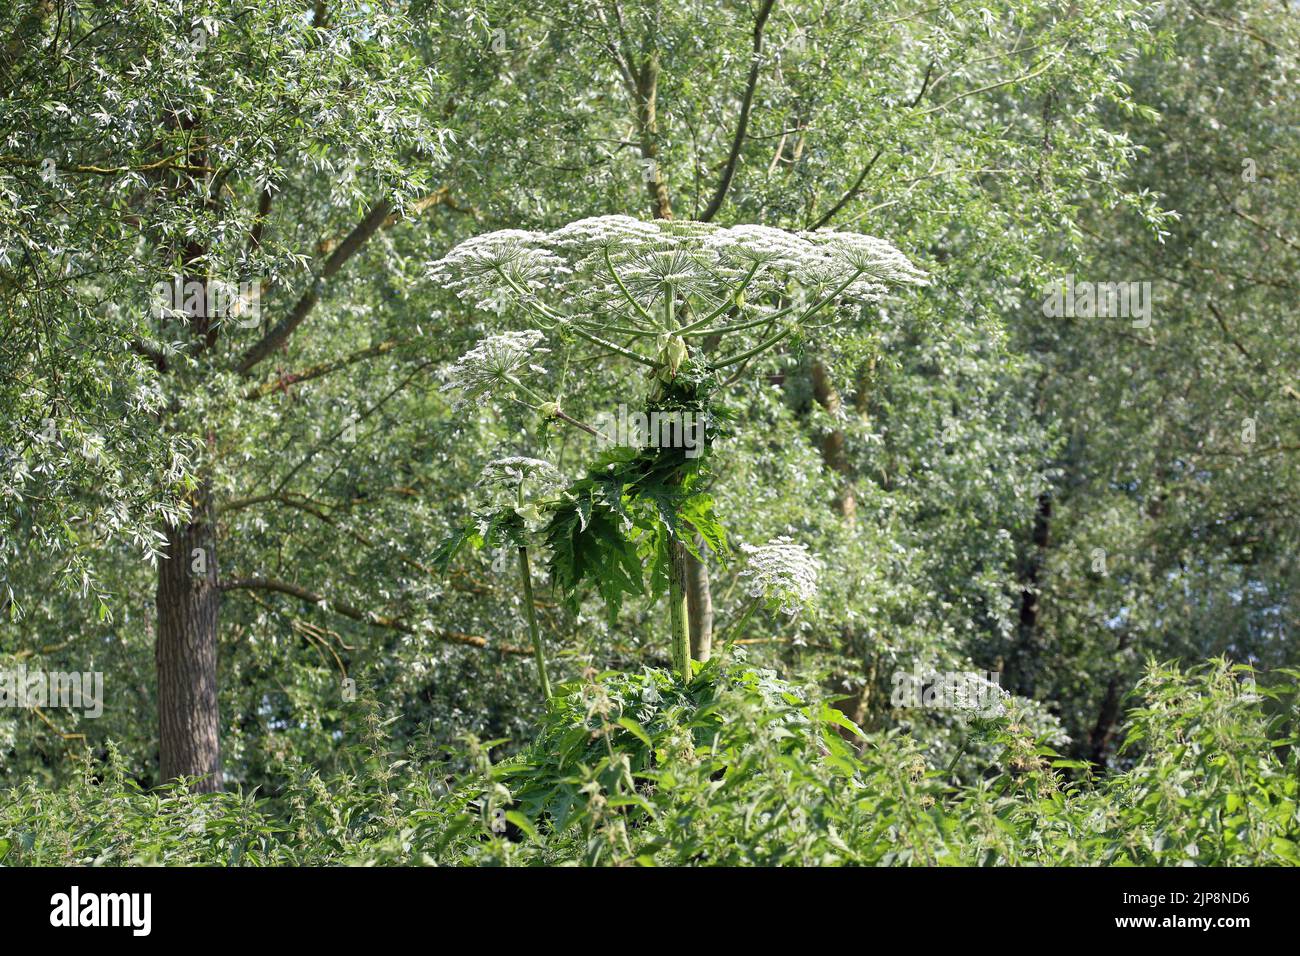 Giant hogweed, Heracleum mantegazzianum, plant in flower in a marsh with a blurred background of willow trees. Stock Photo